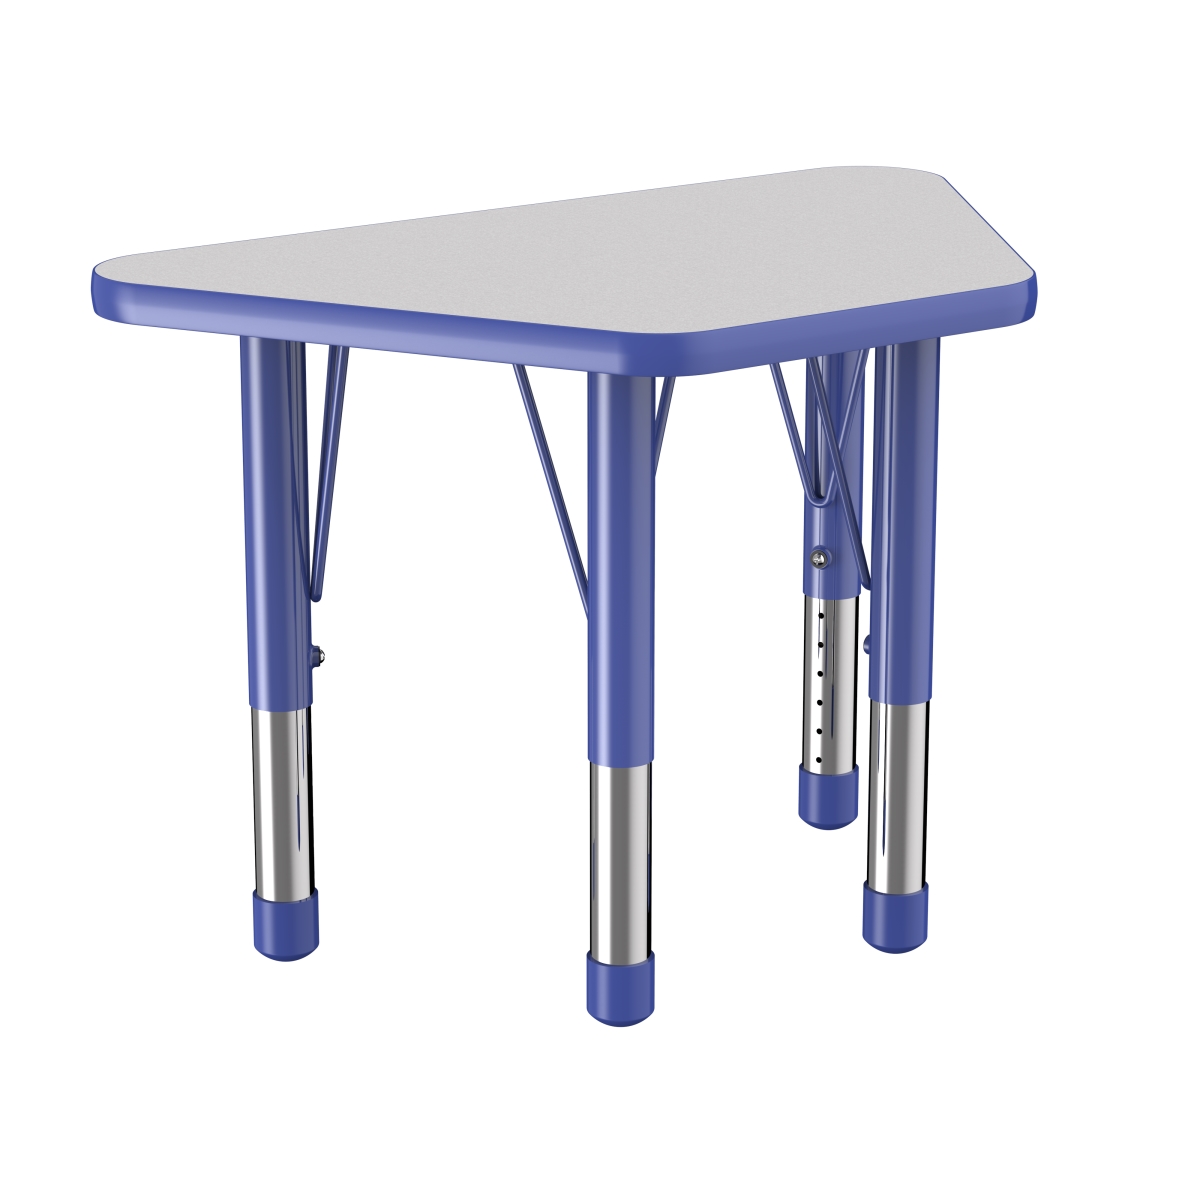 10065-gybl 18 X 30 In. Trapezoid T-mold Adjustable Activity Table With Chunky Leg - Grey & Blue